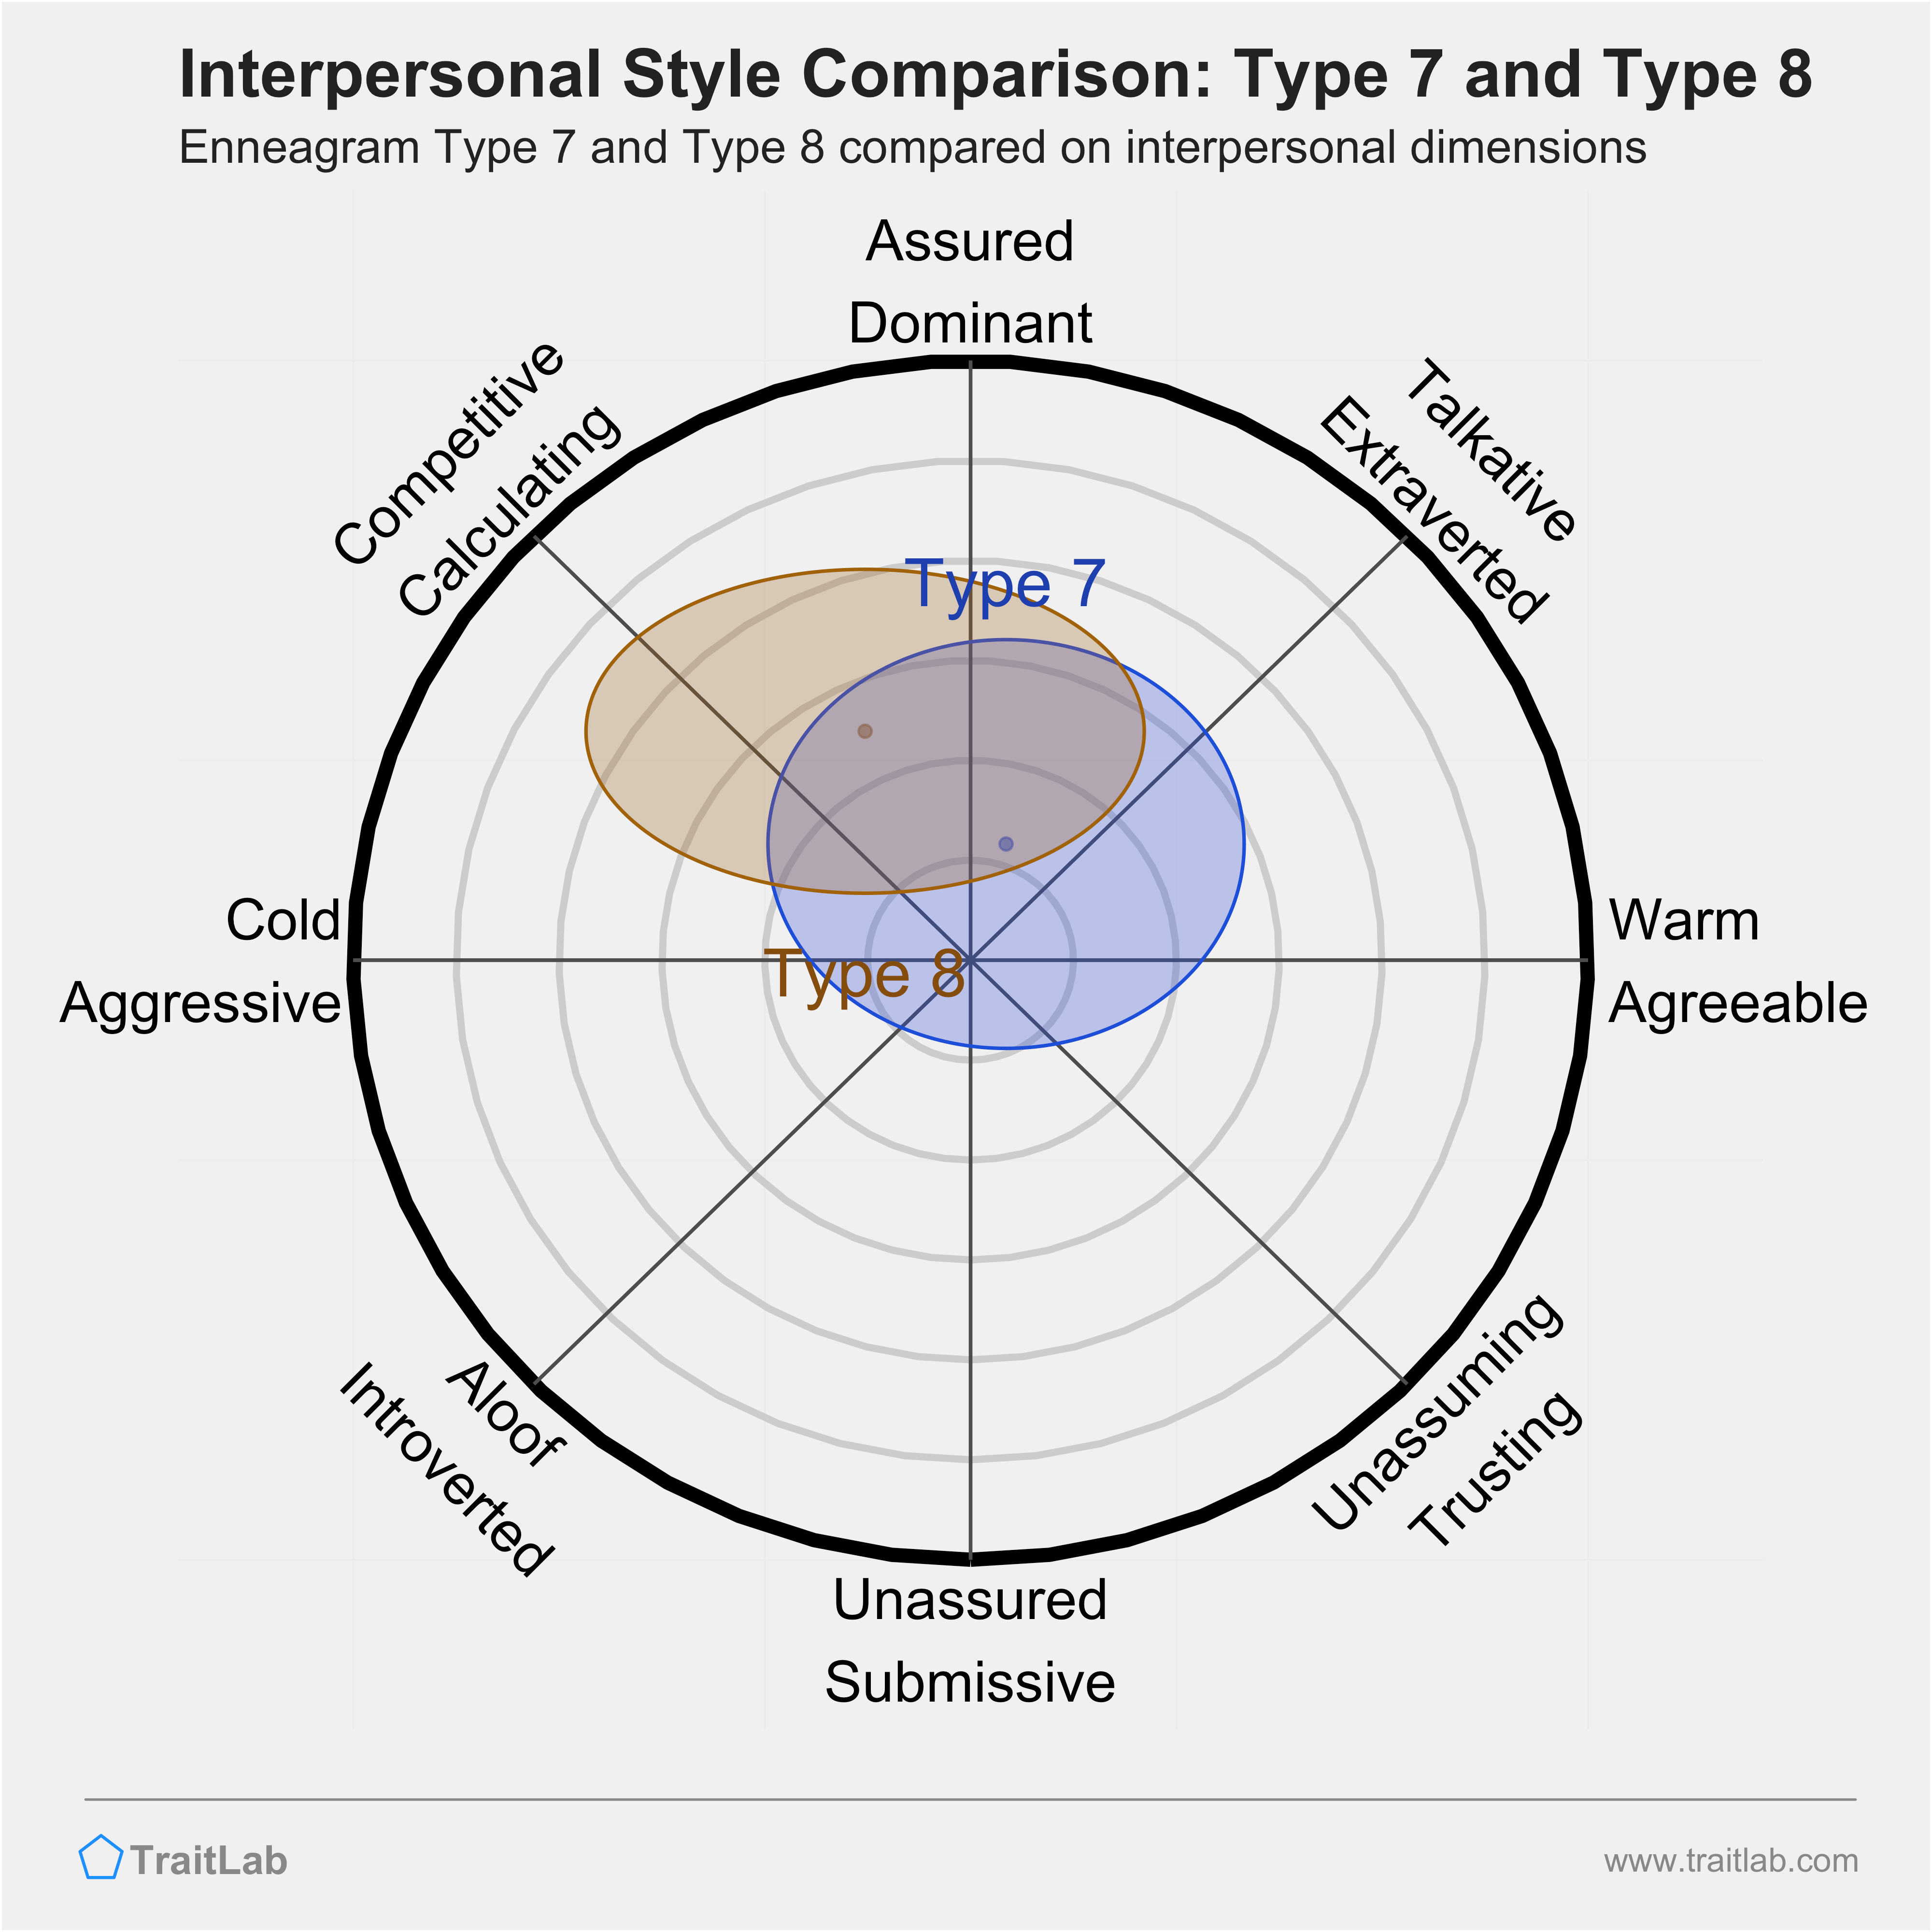 Enneagram Type 7 and Type 8 comparison across interpersonal dimensions